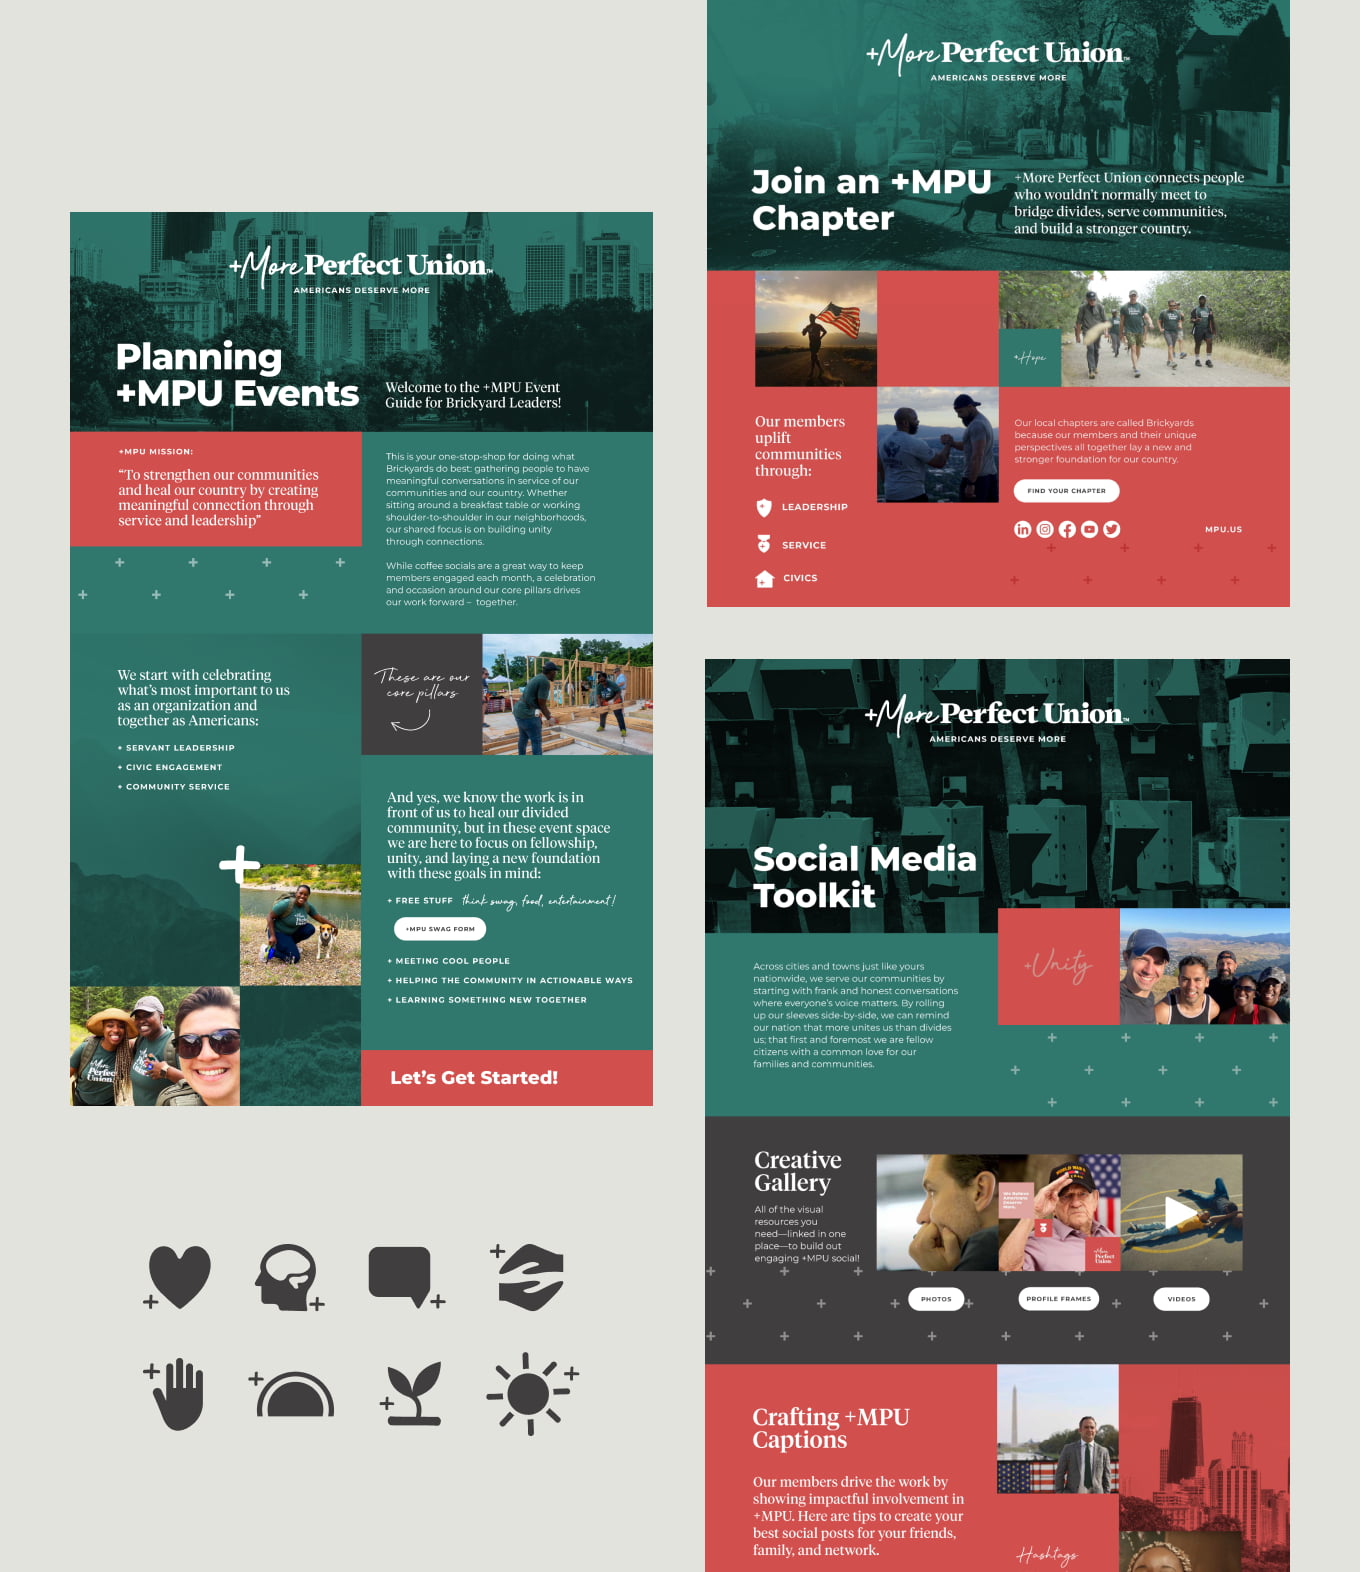 A collage of featured “social media toolkit” designs and lay-outs sits on a light gray background. Each shows a scroll like view of the toolkits with big swaths of color as horizontal panels—mainly dark green and coral shades. The top of each toolkit has an image of a landscape with a dark green overlay. The first toolkit on the left side of the collage reads “Planning +MPU Events” on top of a cityscape. The design includes body copy that is too small to be legible in the collage view. It features three other images of +MPU Brickyard leaders and fellows in dark green t-shirts doing service like building houses. One black woman pets her beagle in front of a lake. Another image is Victoria Rametta (+MPU’s Director of Operations) in black, round sunglasses taking a selfie with two Black women while hiking together. Typography varies in size across the design and there are some plus sign patterns along with white buttons.   The second toolkit on the right side of the collage reads “Join an +MPU Chapter.” It has a short height and shows a top image of a dog on a neighborhood street. Below the dog is a coral panel with three images and varying sizes of typography. One man runs with an American flag and is backlit by the sun. Another image shows two strong men gripping fists in a bro-like greeting in front of a mountain. They are in the shadows so it is hard to make out their facial features. The third image is long and horizontal, with a diverse group of +MPU fellows in dark green t-shirts, hiking. Three icons: a shield, a Medal of Honor, and a house also sit in this lay-out next to the images and small subheads. The last toolkit featured below the second one reads “Social Media Toolkit.” This headline sits on top of a an overhead view of a suburb. Images stack across the lay-out like building blocks featuring loopy sayings like “unity.” The images include a mountainous selfie of a diverse group of +MPU Fellows; a close-up of a middle-aged white man with brown hair deep in thought; an elderly white male veteran with a black Veterans hat doing a salute; two Black children relaxing and laying on a basketball court; and Garrett Cathcart (+MPU’s Cofounder) smiling in front of an American flag and the Washington Monument. Type sits alongside all of these images. A few images (the man in thought, the veteran, and the two Black children) feature white buttons beneath them.   In the bottom left corner of the collage are solid, dark gray icons: a rounded heart, a face profile with the cut-out of a brain; a simple message bubble; two hands almost embracing from above and below; a palm; a sunset made out of a semi-circle; a budding plant with two leaves; and a circular sun with little circular rectangles mimicking beams of light radiating outwards.